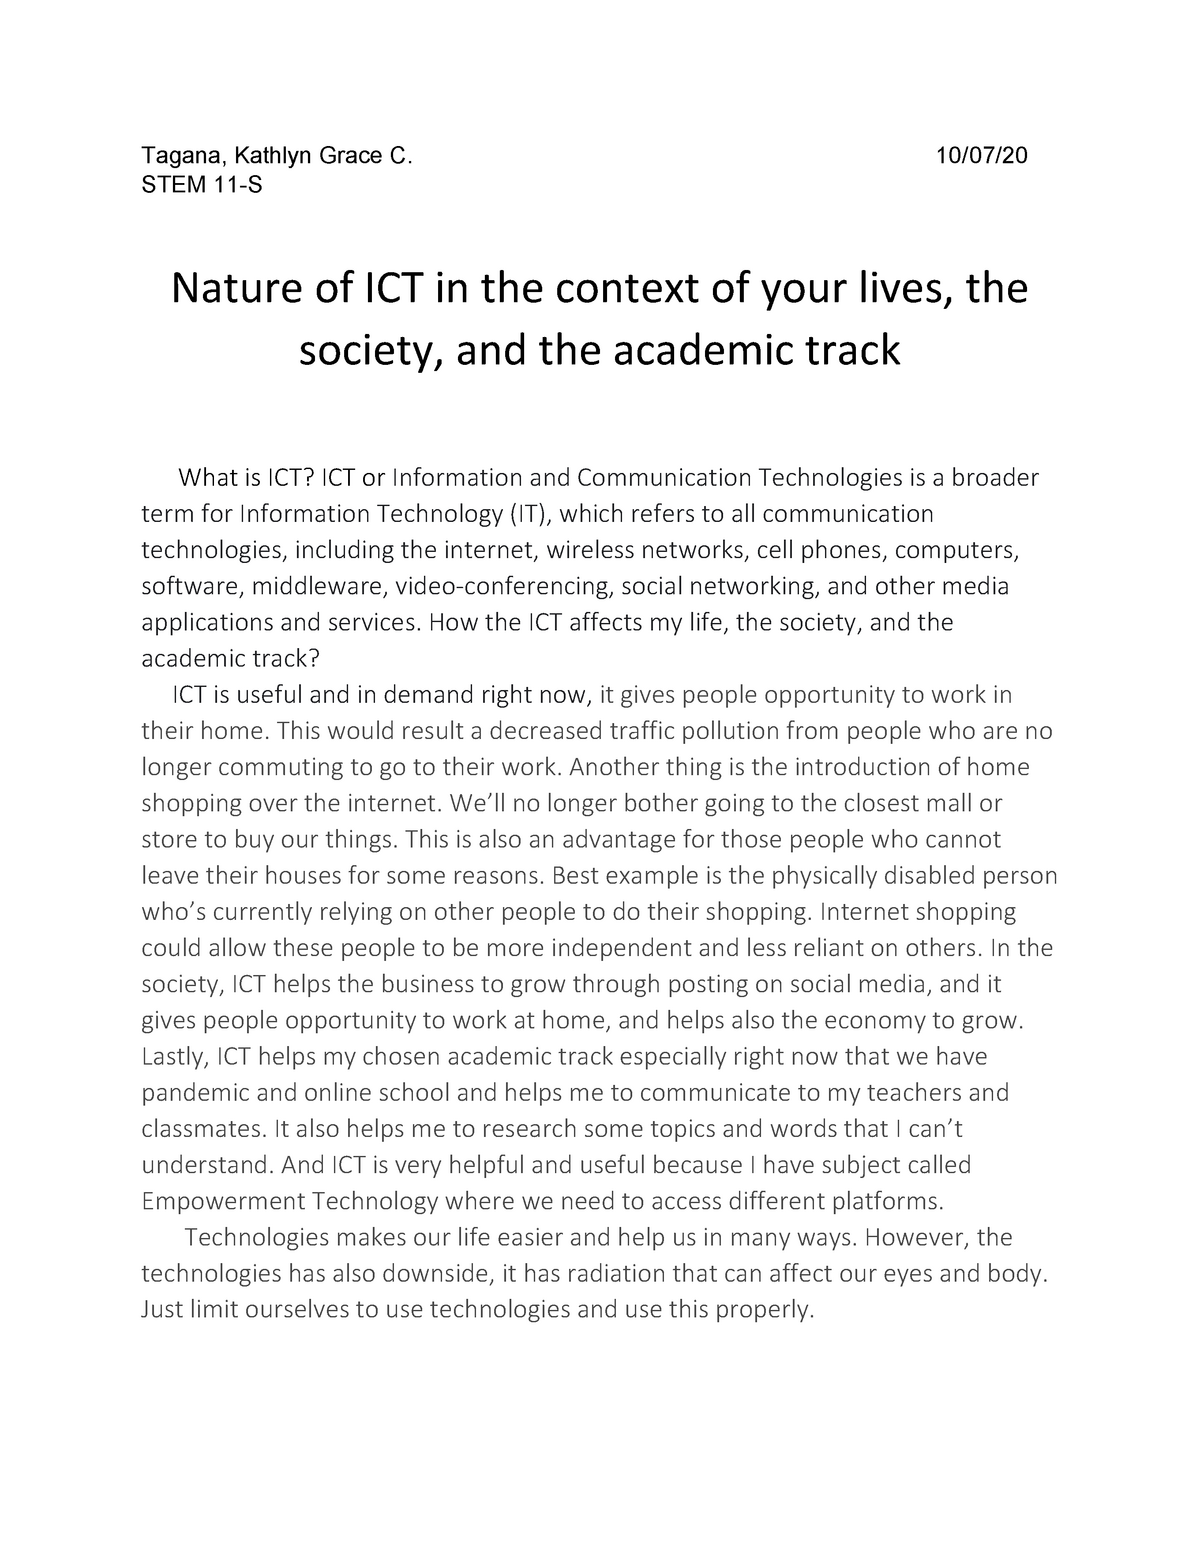 essay title about ict